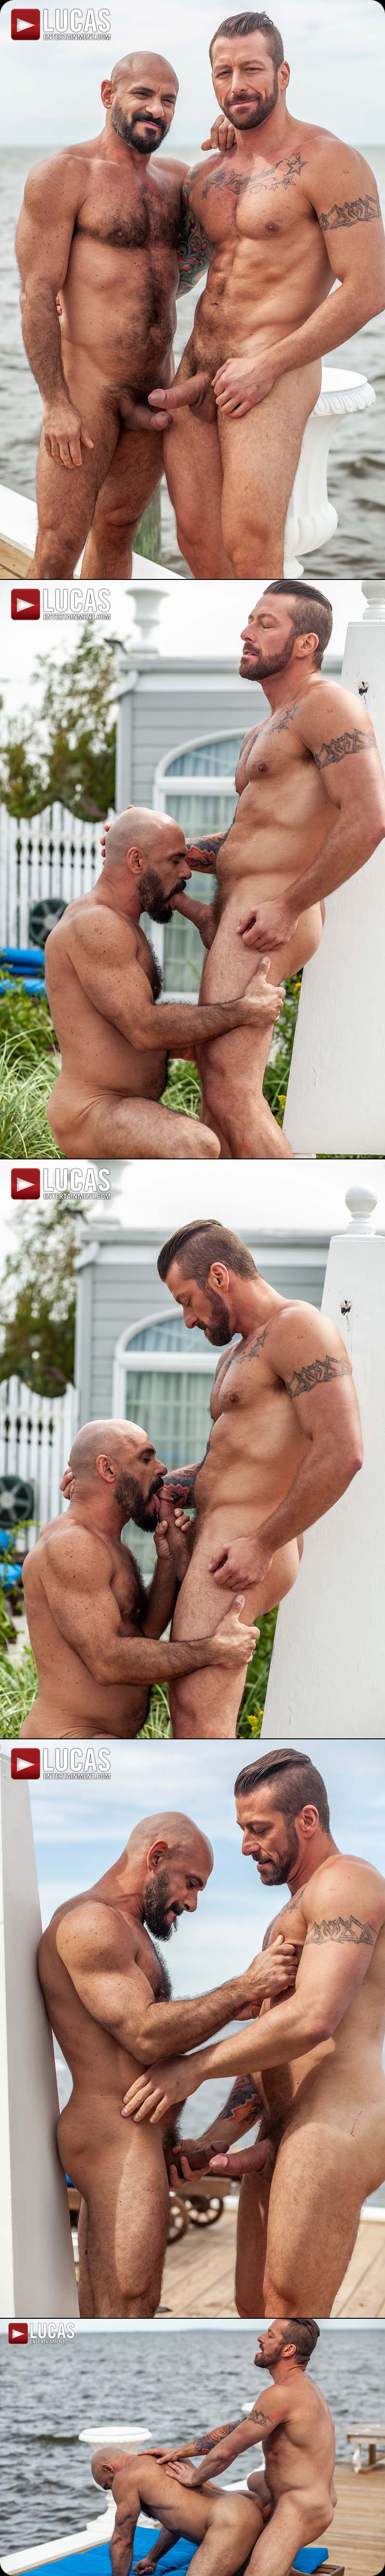 Quality Time With Daddy, Scene Four (Hugh Hunter And Gio Forte Fuck On Fire Island) at LucasEntertainment